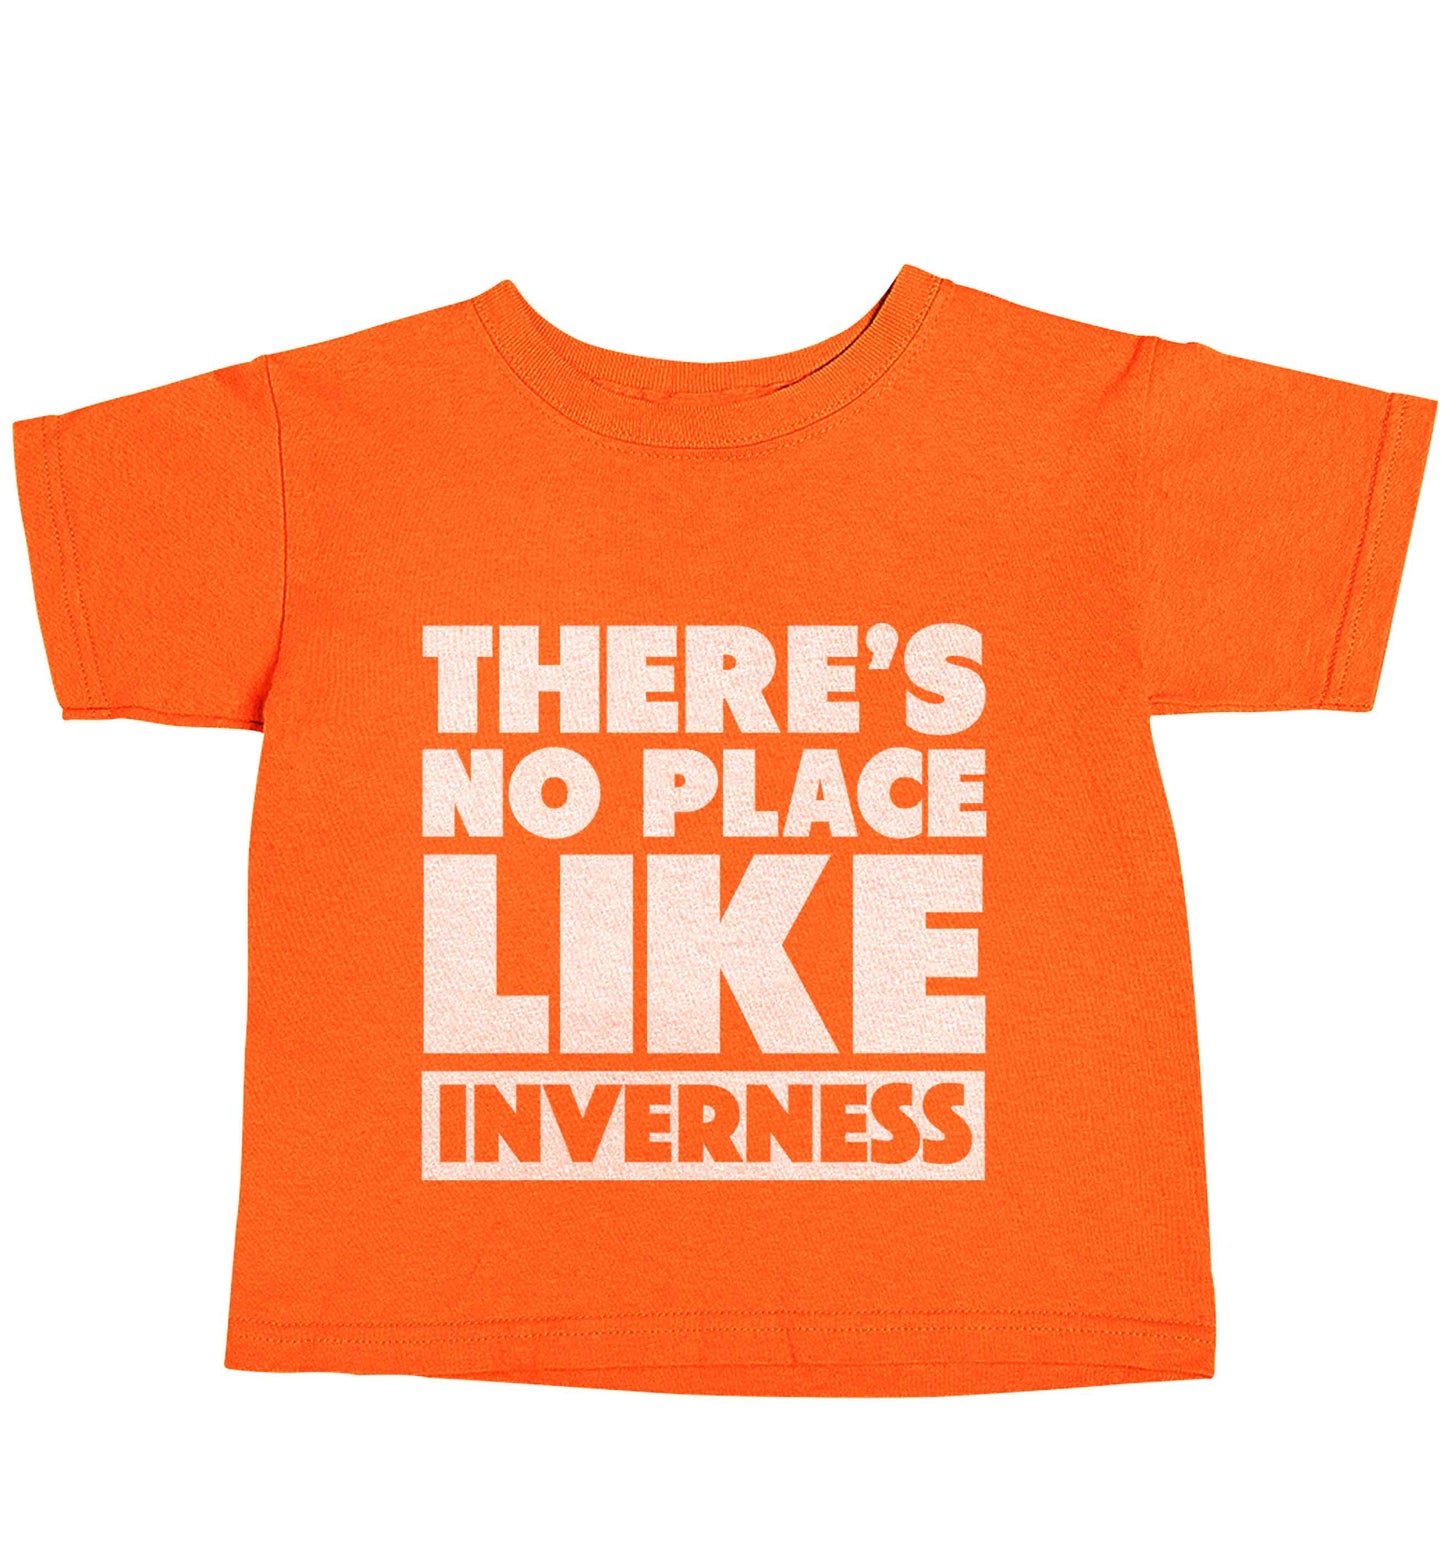 There's no place like Inverness orange baby toddler Tshirt 2 Years